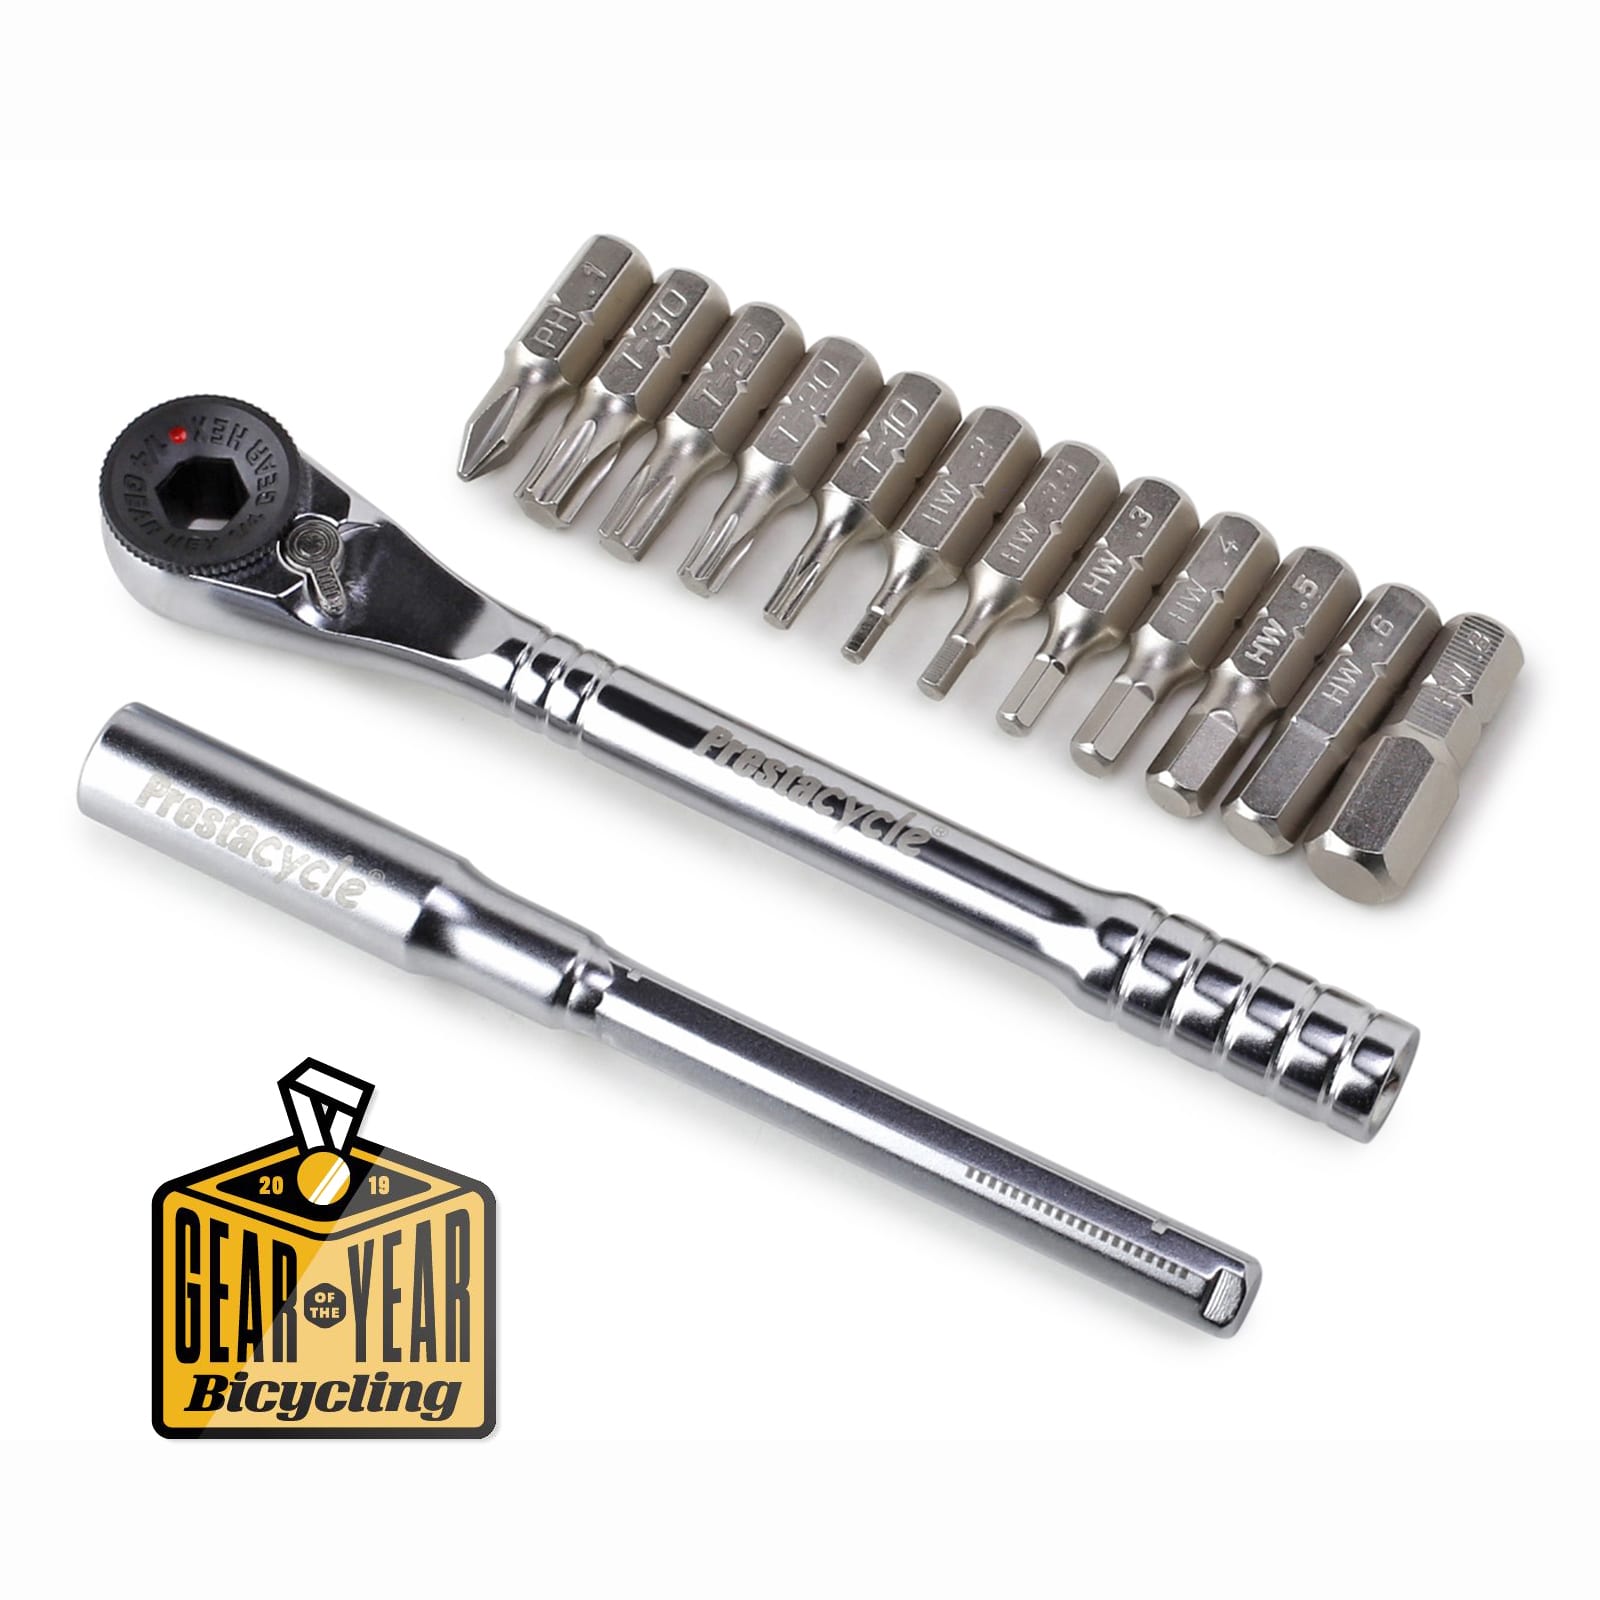 Ratchet tools. Prestacycle Torqkeys t-Handle preset Torque Tool - 10nm. T Handle Ratchet. Vim Tools hbr3 1/4" hex Micro bit Ratchet. Giant Liv Multi-Tool with Ratchet System.